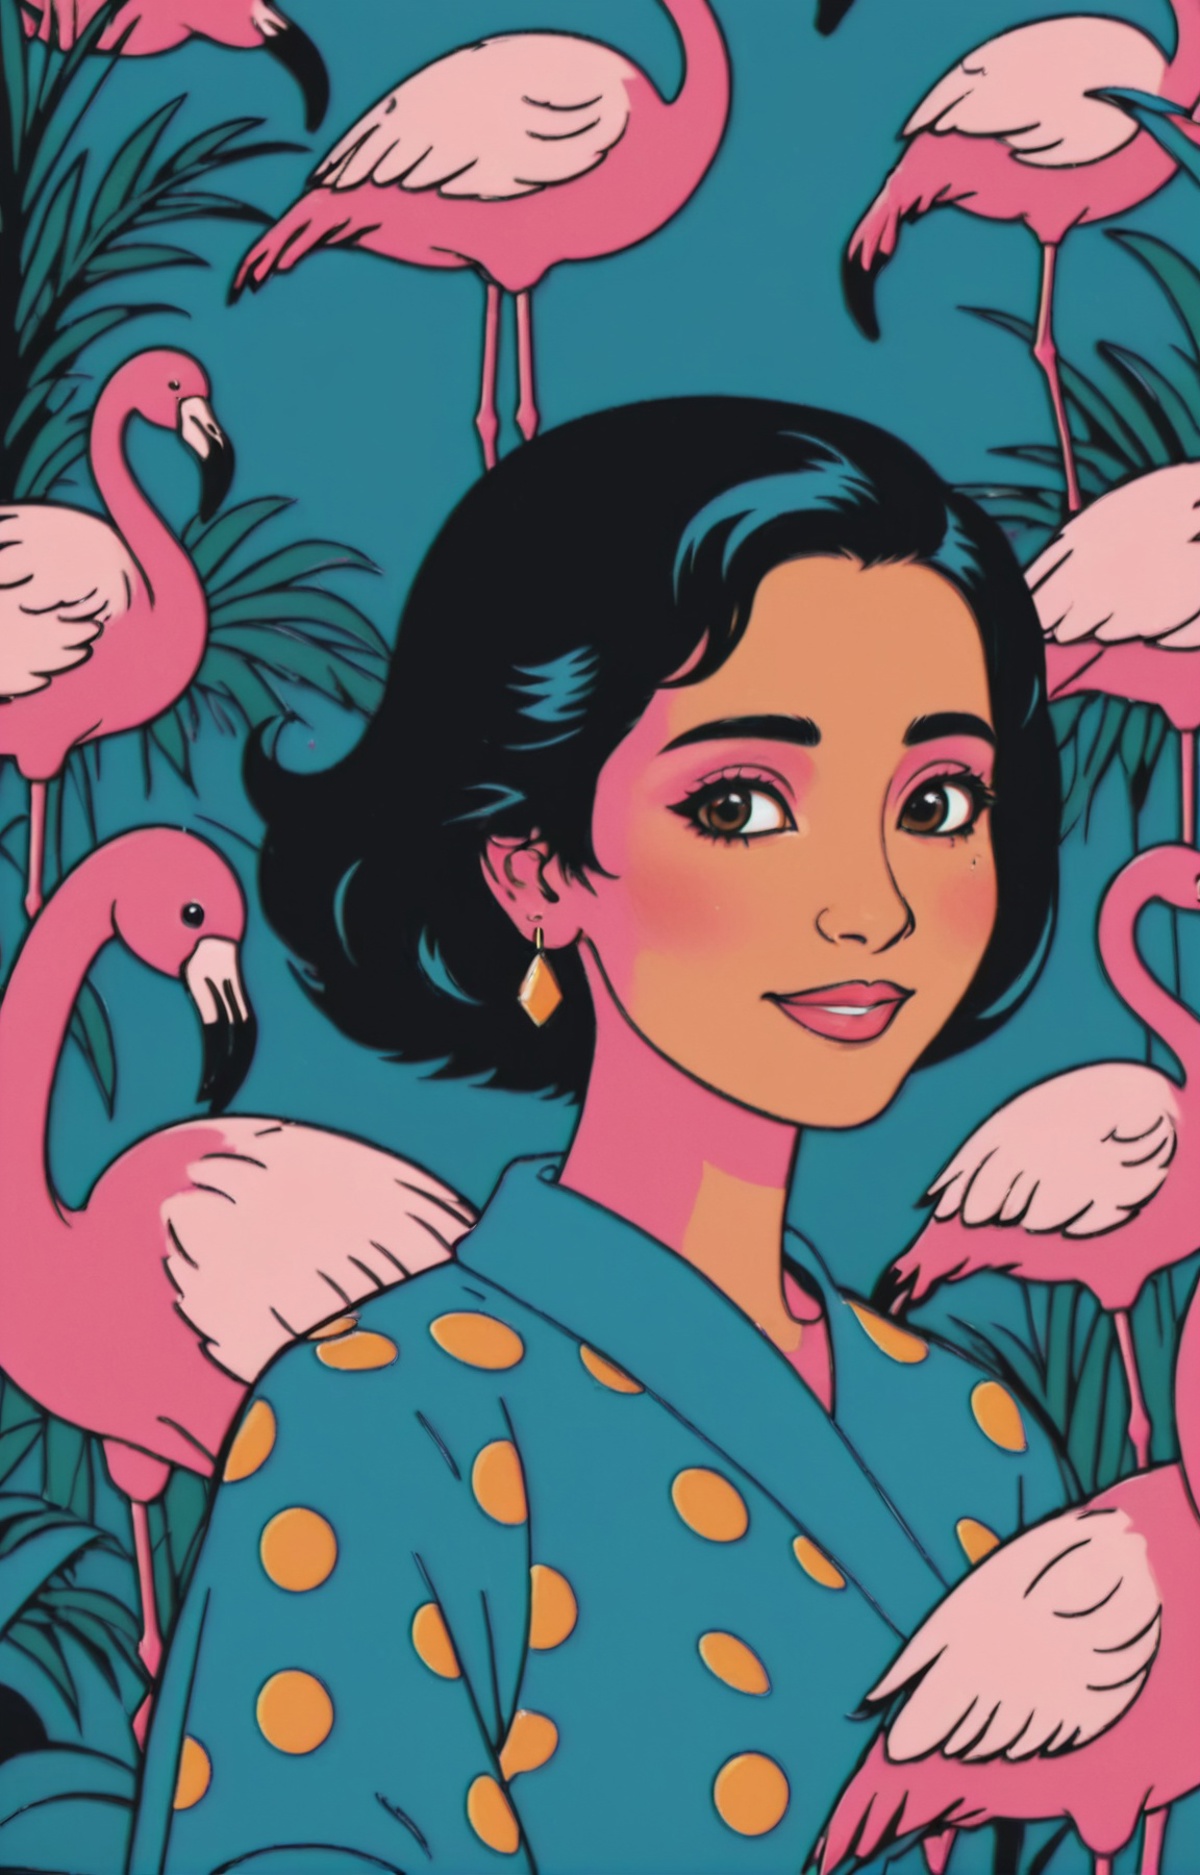 A girl with a pink face, blue dress, and pink hair is surrounded by flamingos.